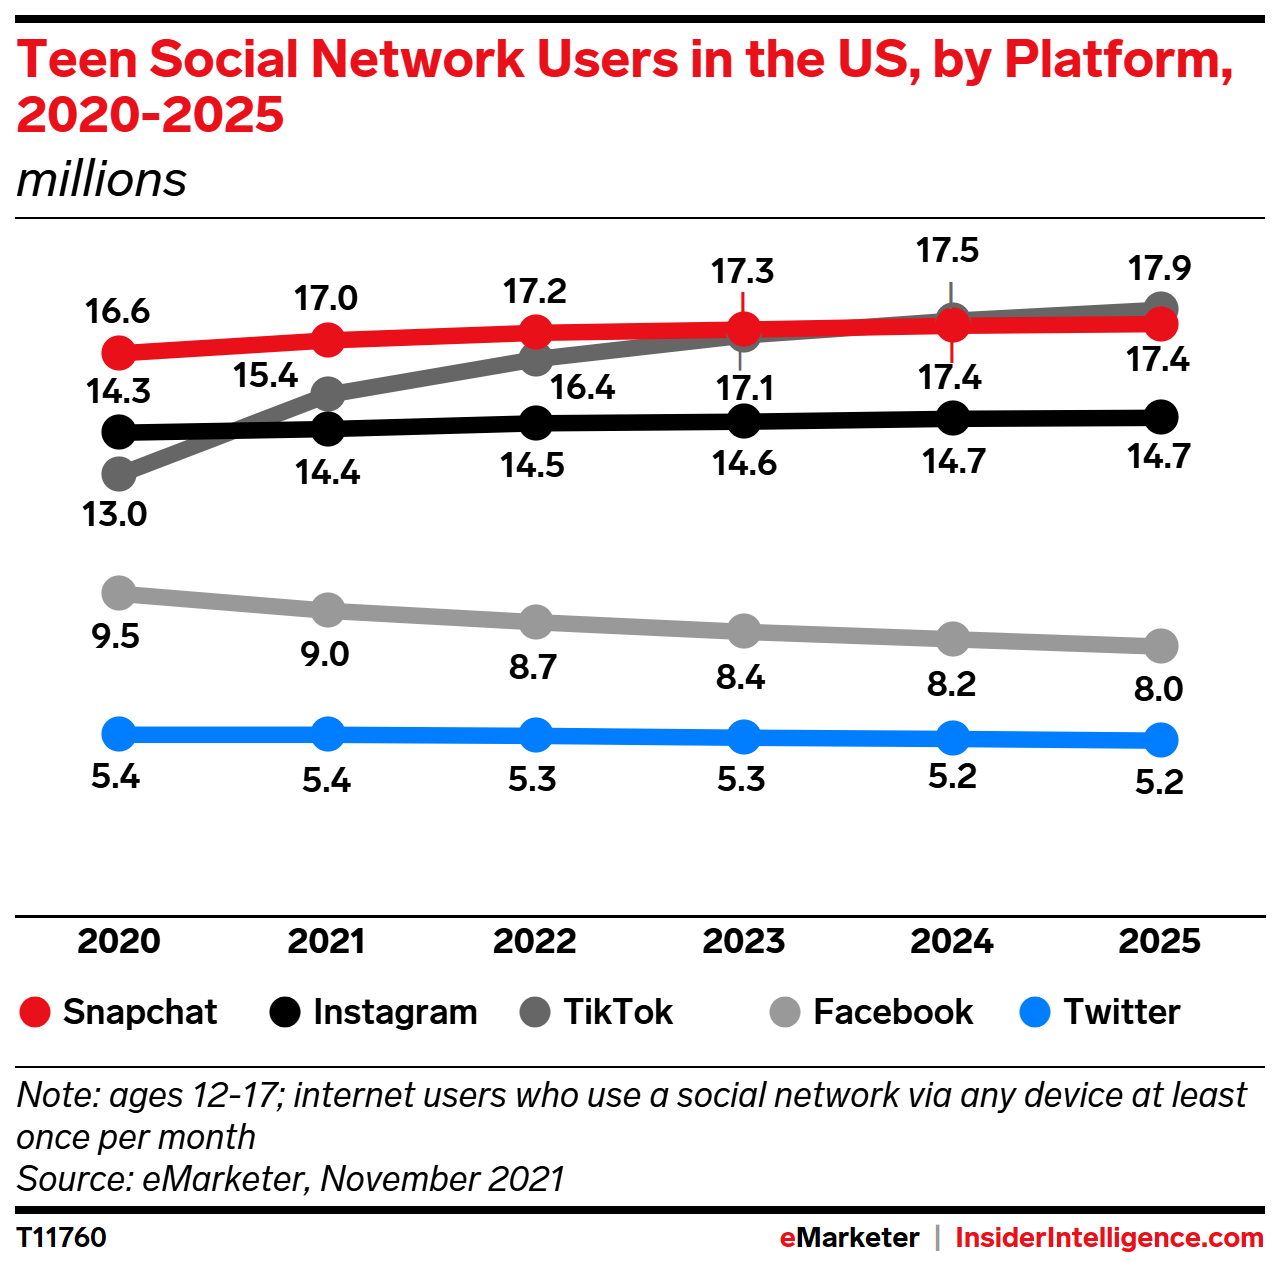 Teen Social Network Users in the US, by Platform, 2020-2025 (millions)